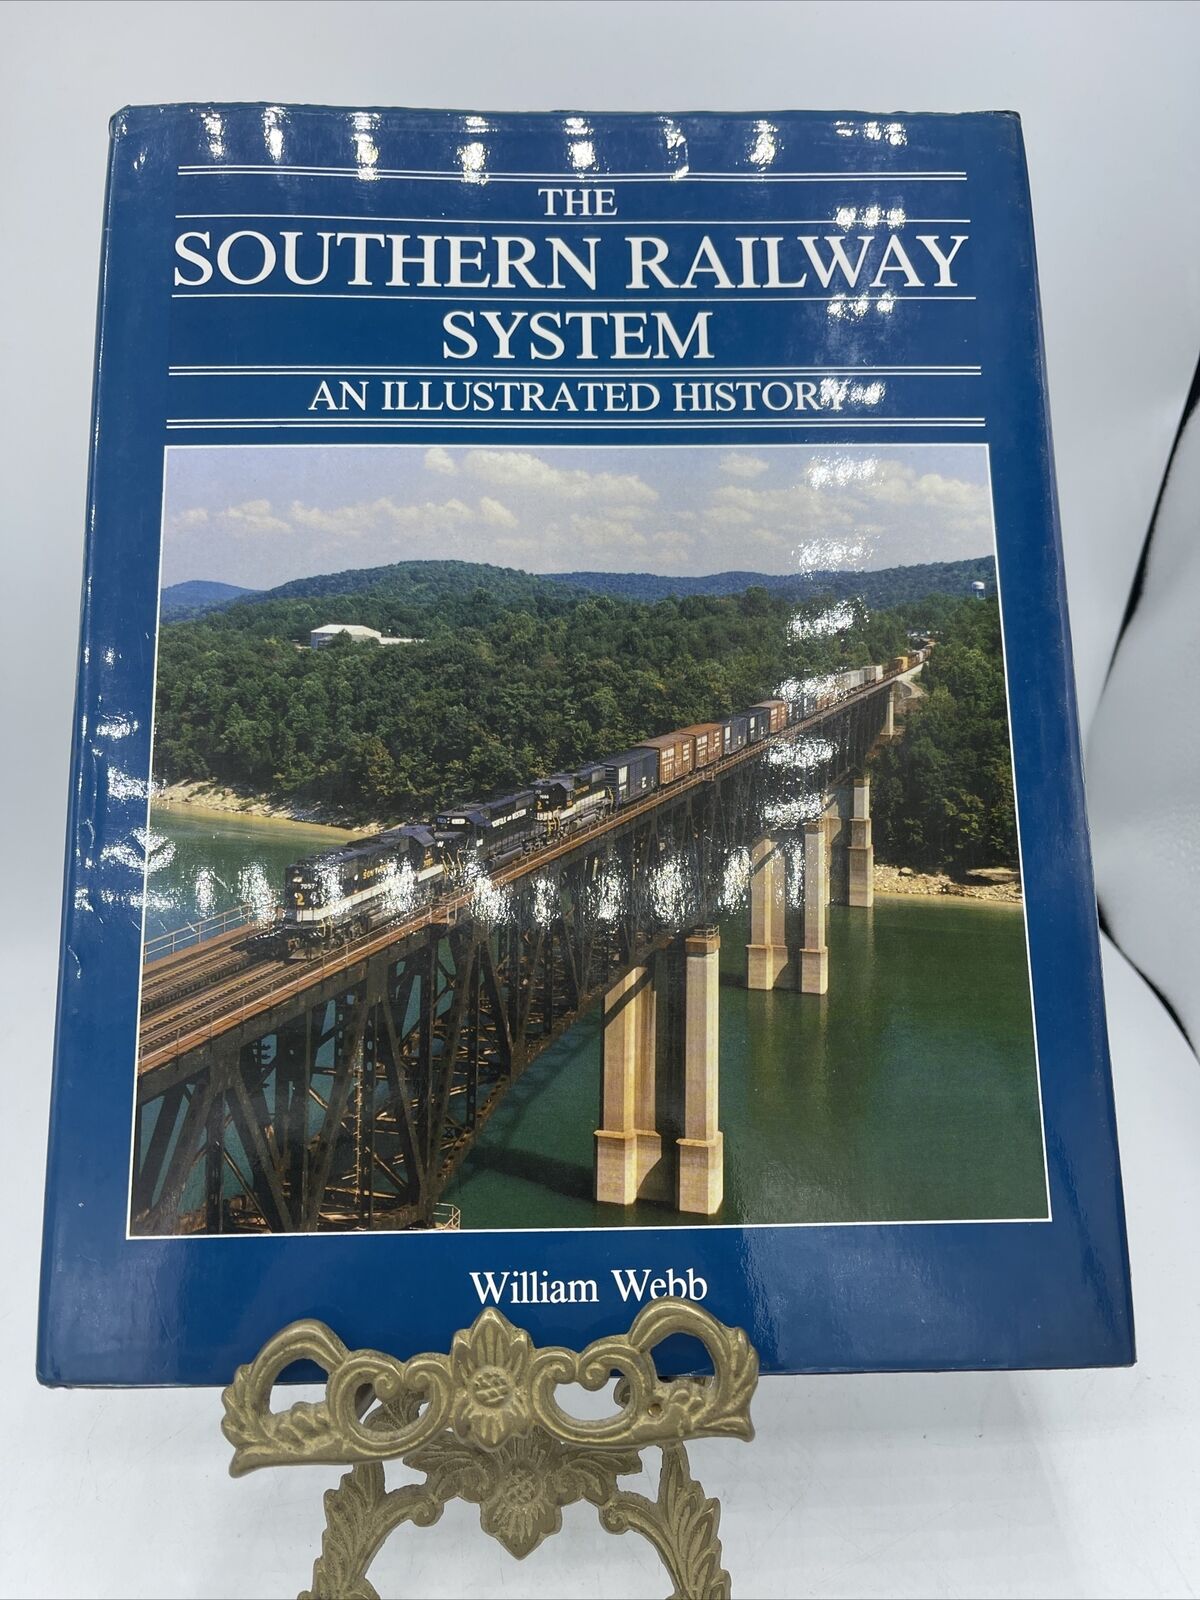 The Southern Railway System An Illustrated History By William Webb 1986 HB